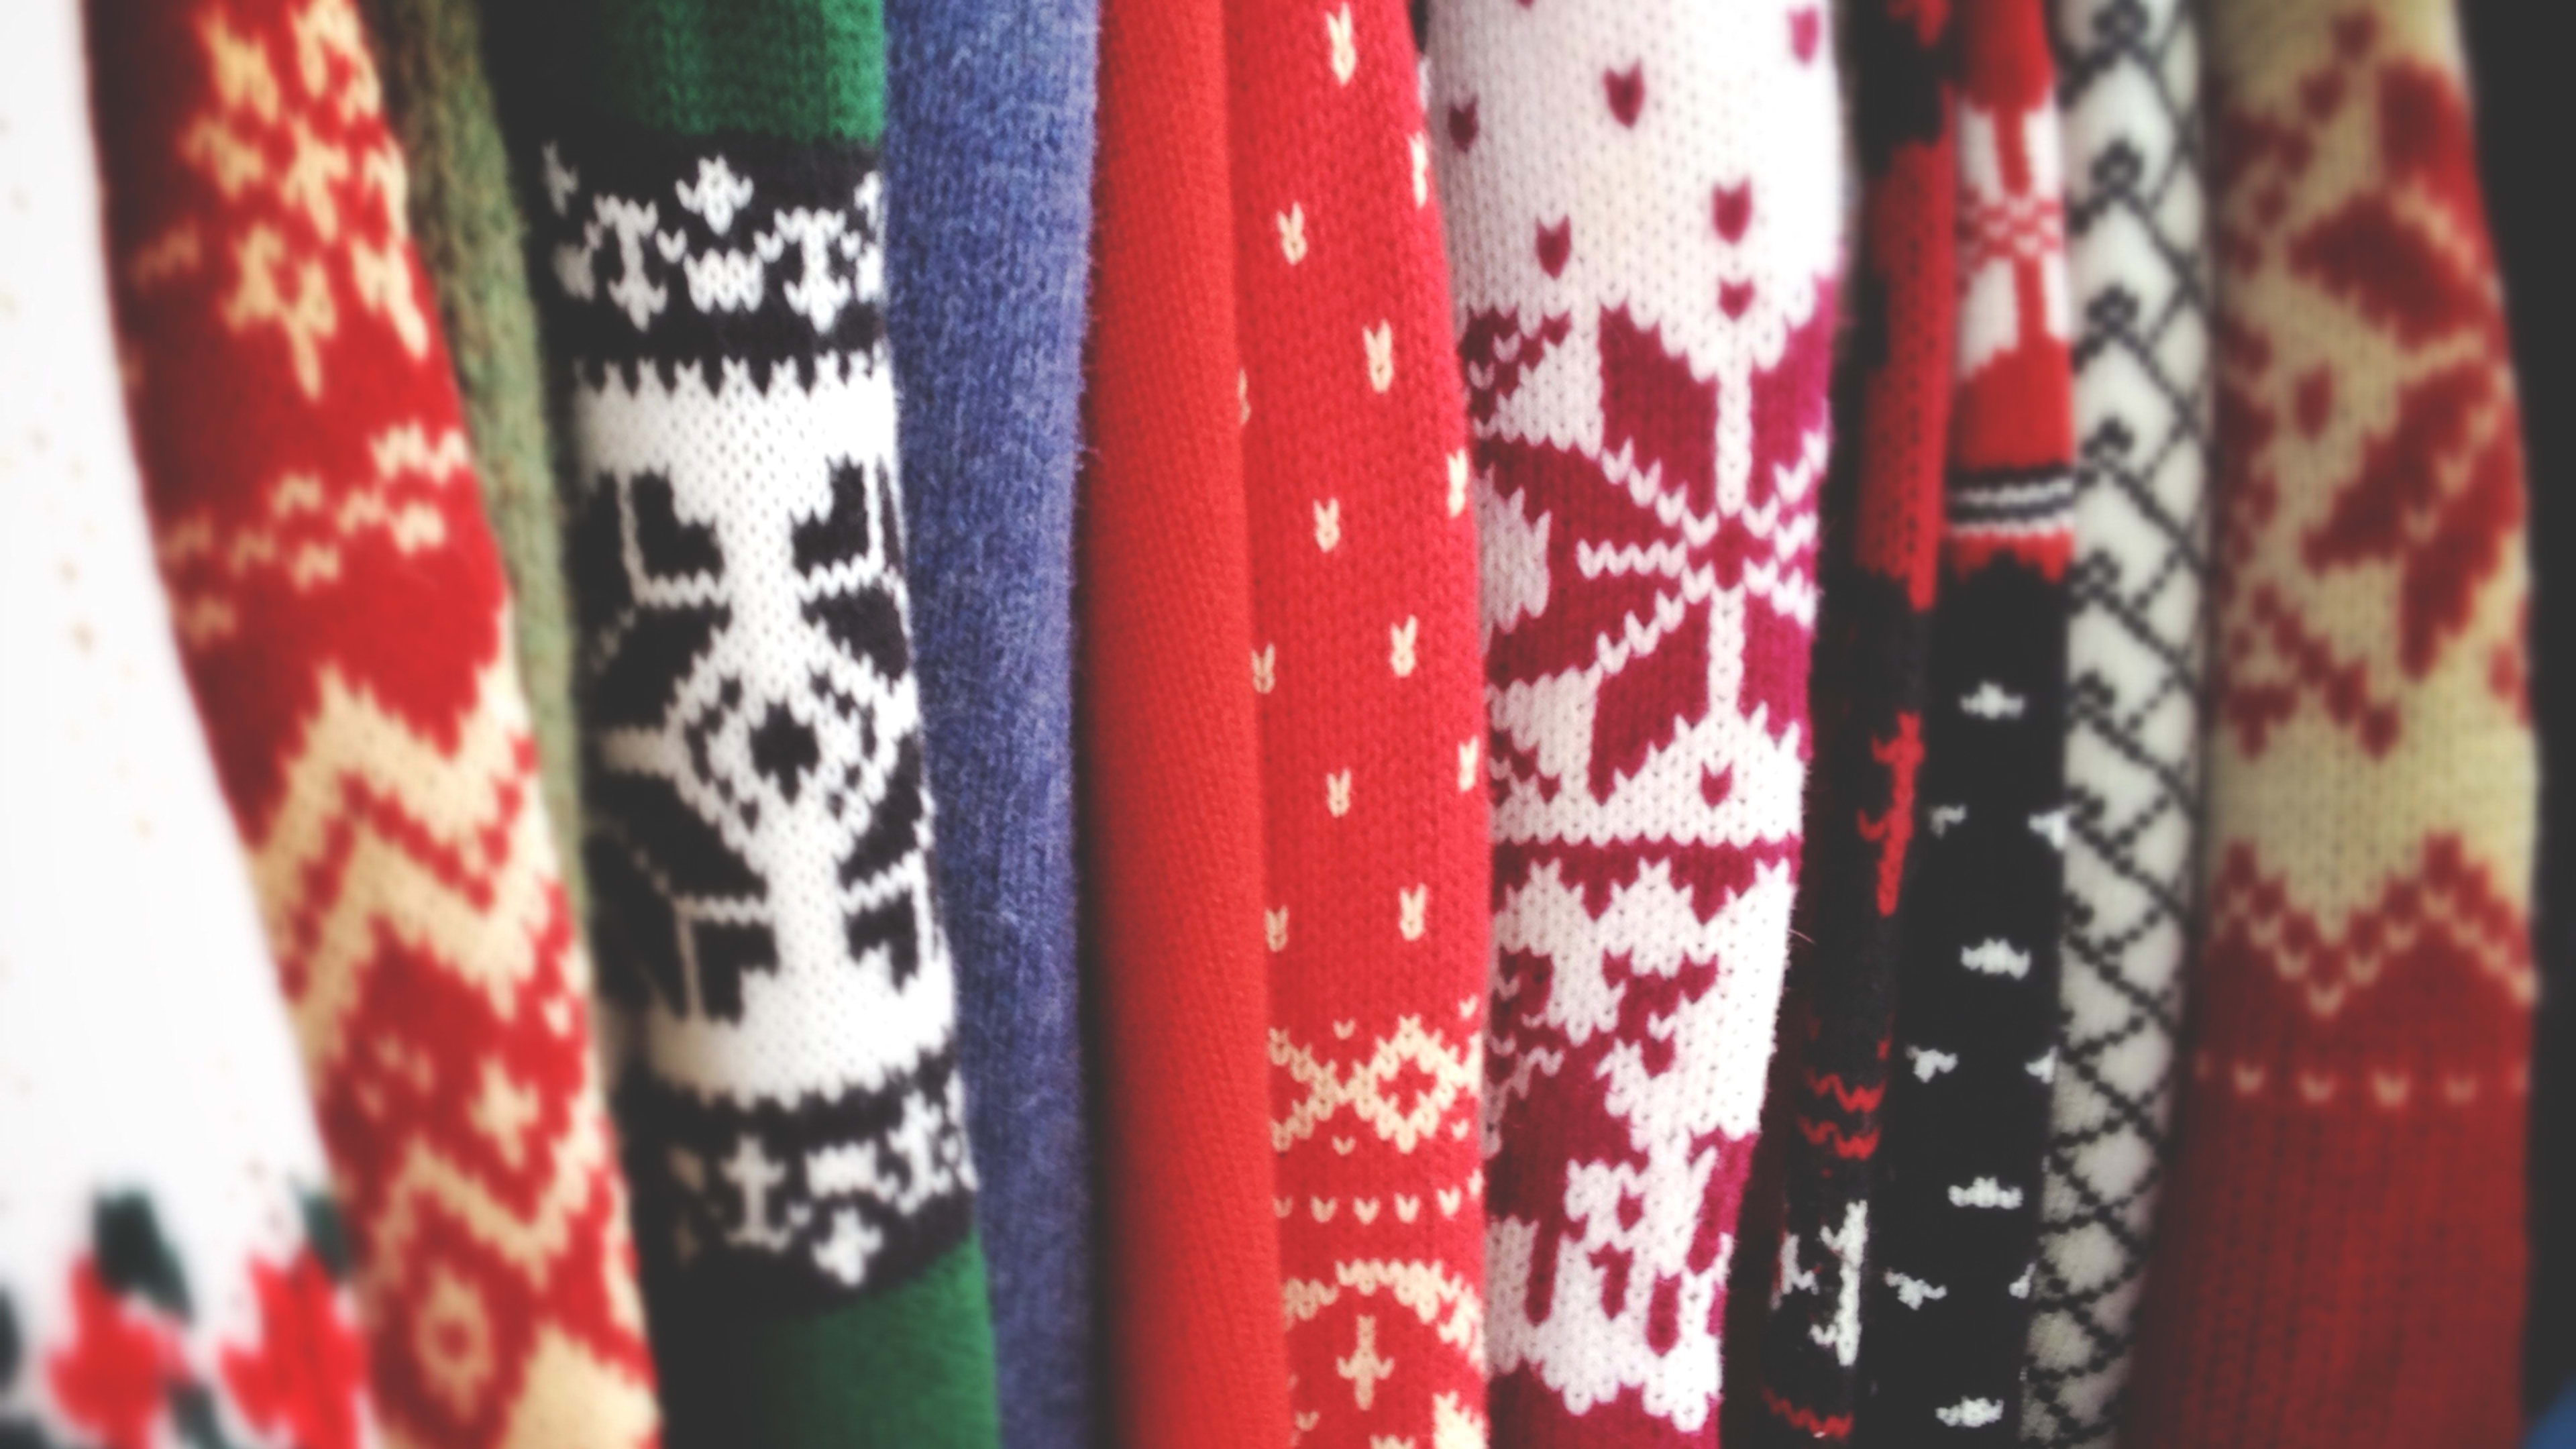 How To Best Organize And Share Those Ugly Sweater And Office Party Pics